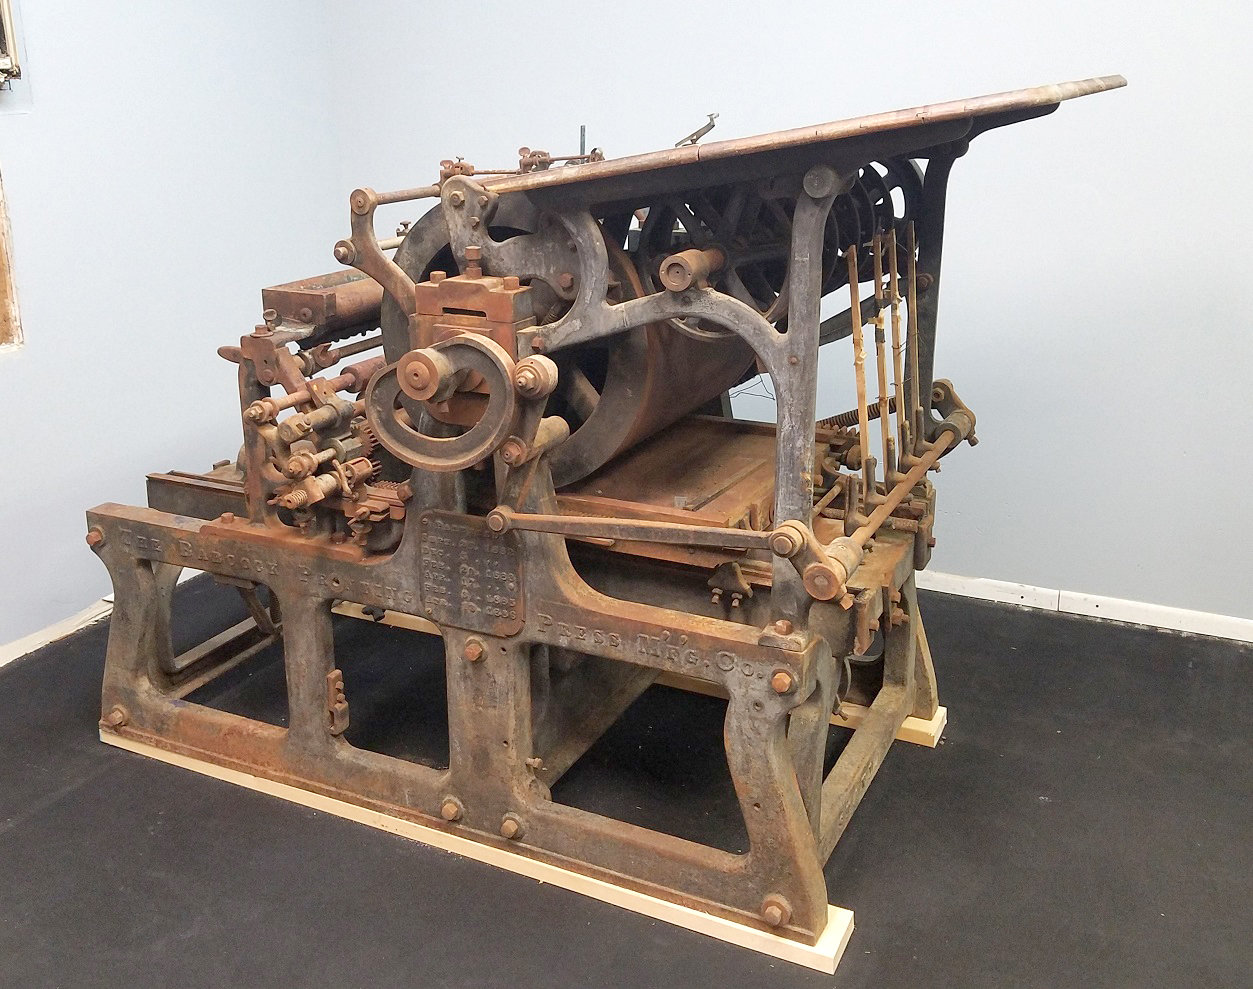 One Printing Press and Three Museums - South Street Seaport Museum